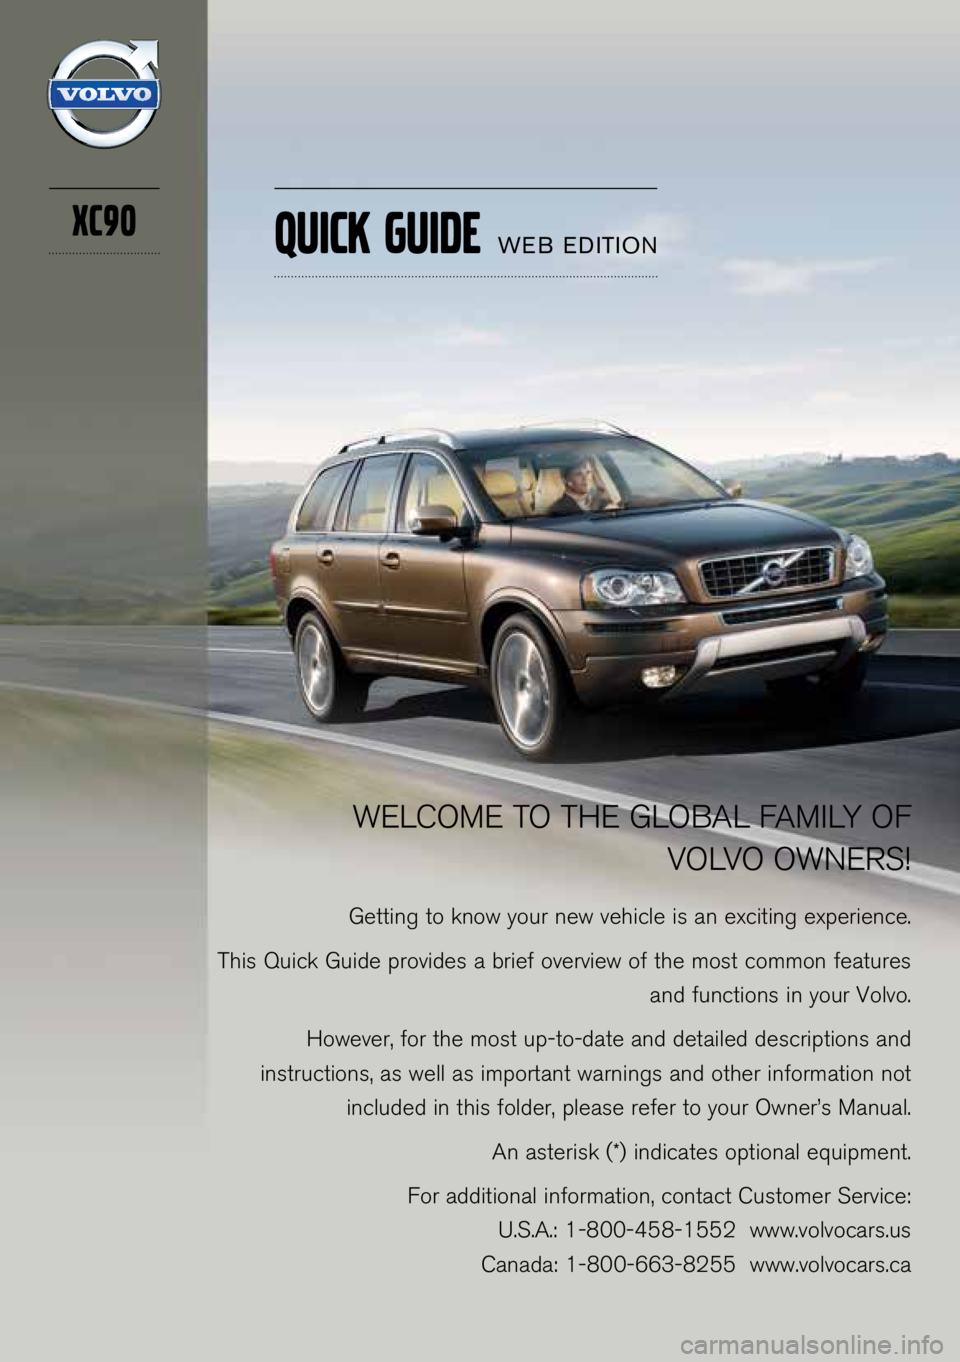 VOLVO XC90 2014  Quick Guide WELCOME TO THE GLOBAL FAMILY OF VOLVO OWNERS\f
Getti\bg to k\bow your \bew vehicle is a\b exciti\bg experie\bce.
This Quick Guide provides a brief overview of the most commo\b features  a\bd fu\bctio\